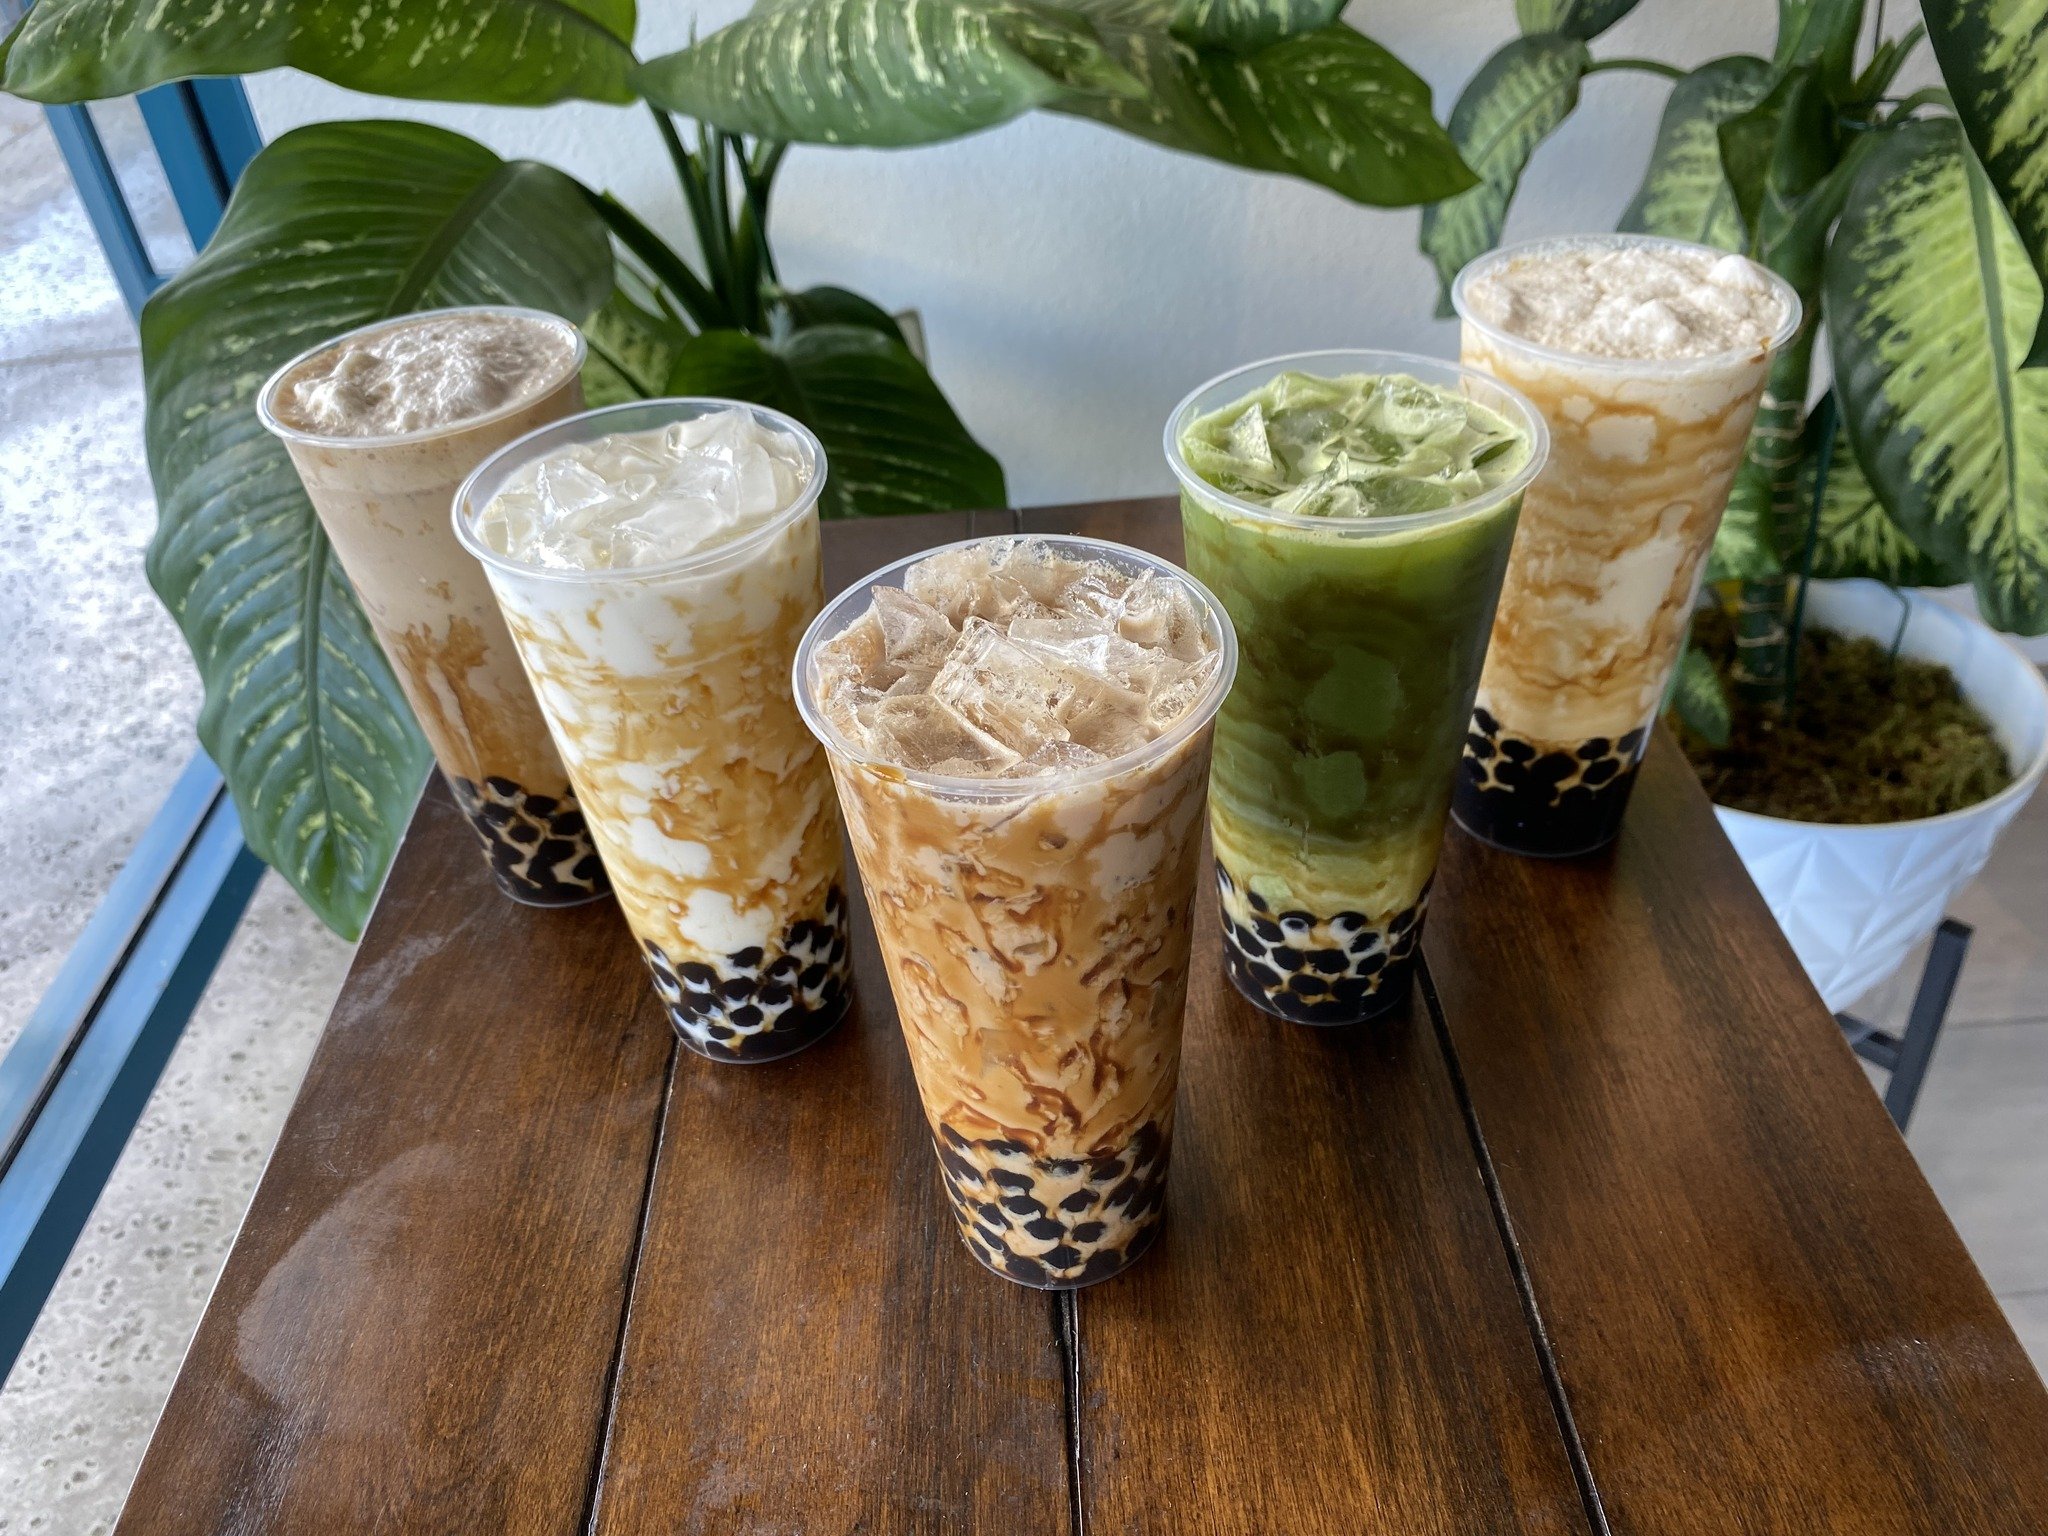 Is it too early to clock out for the weekend? Never😈
Should you get a brown sugar boba tea today? Always😇

✨𝗠𝗲&middot;𝗠𝗲 𝗕𝗿𝗼𝘄𝗻 𝗦𝘂𝗴𝗮𝗿 𝗕𝗼𝗯𝗮 𝗦𝗲𝗿𝗶𝗲𝘀✨
𝗕𝗹𝗲𝗻𝗱𝗲𝗱 𝗕𝗿𝗼𝘄𝗻 𝗦𝘂𝗴𝗮𝗿 𝗕𝗼𝗯𝗮 𝗠𝗶𝗹𝗸 𝗧𝗲𝗮
𝗕𝗿𝗼𝘄𝗻 𝗦𝘂?